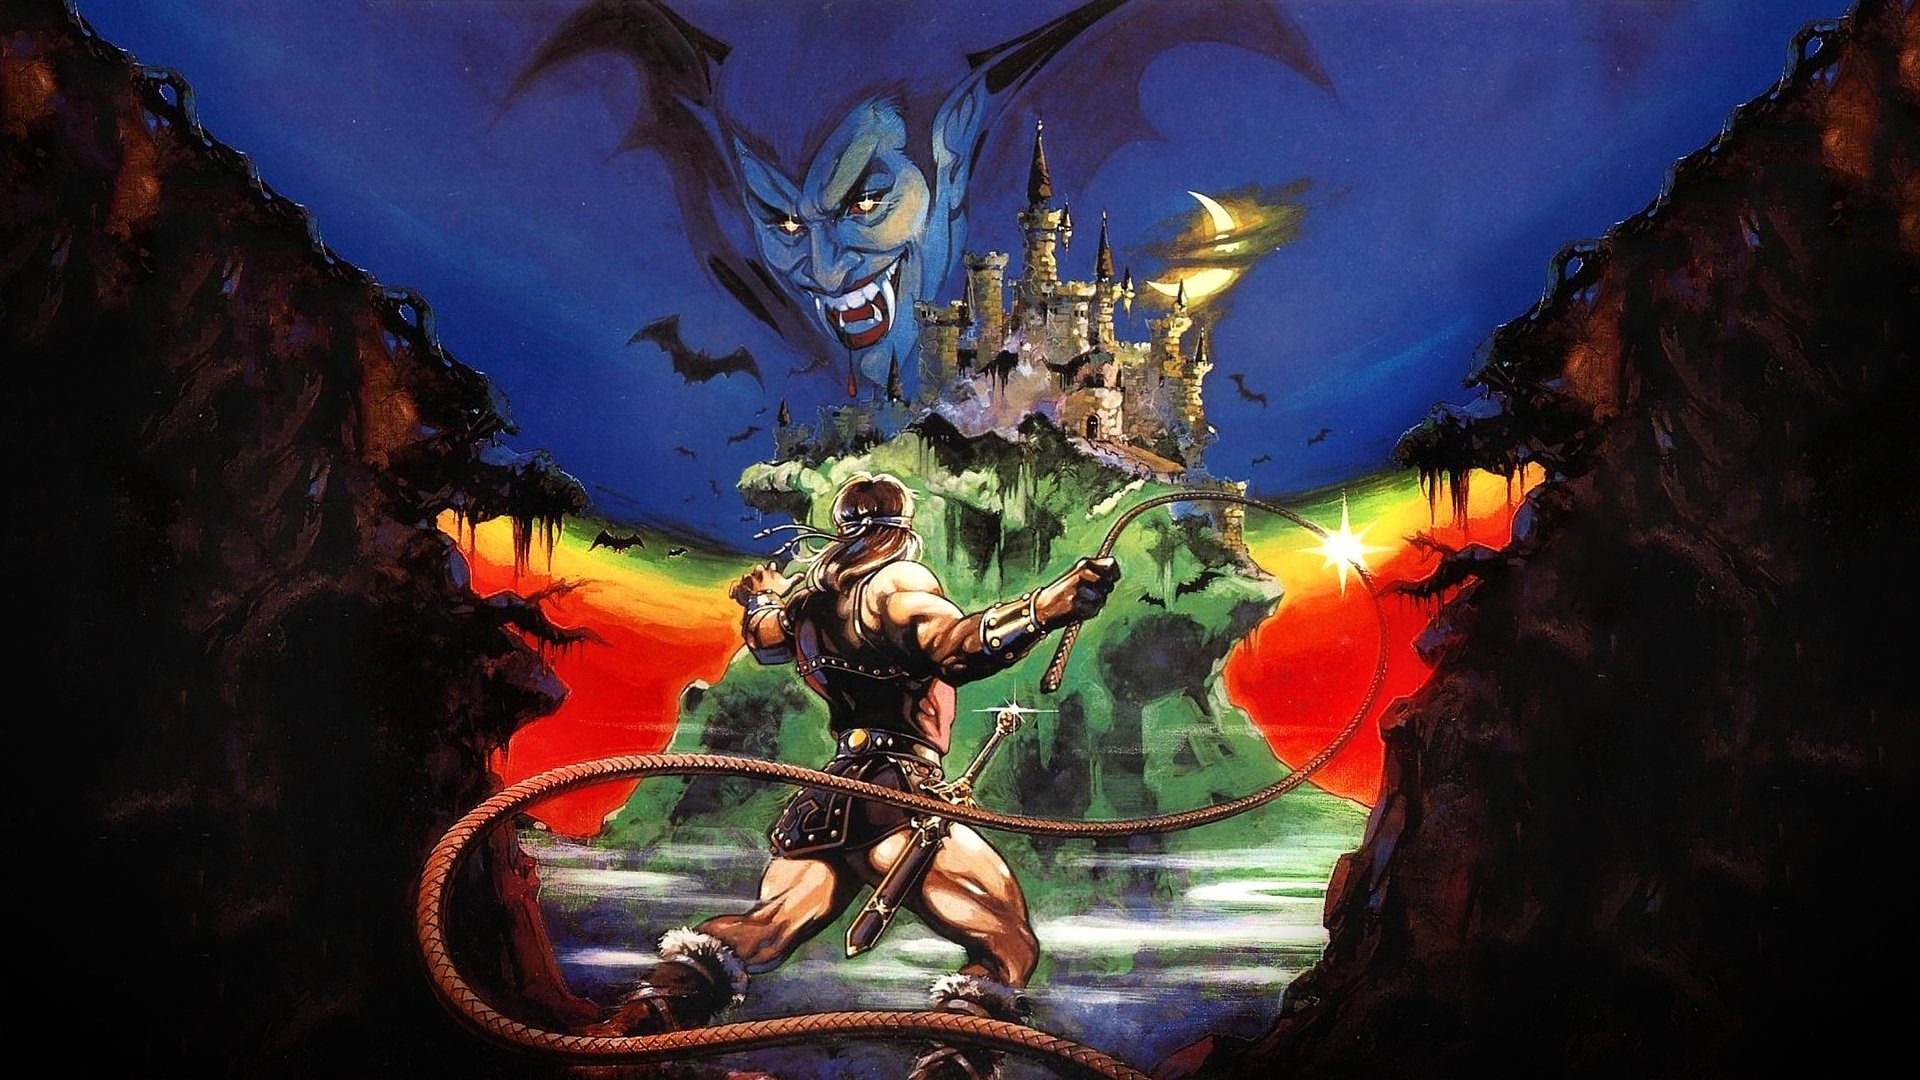 Castlevania Anniversary Collection review: hard to screw this up